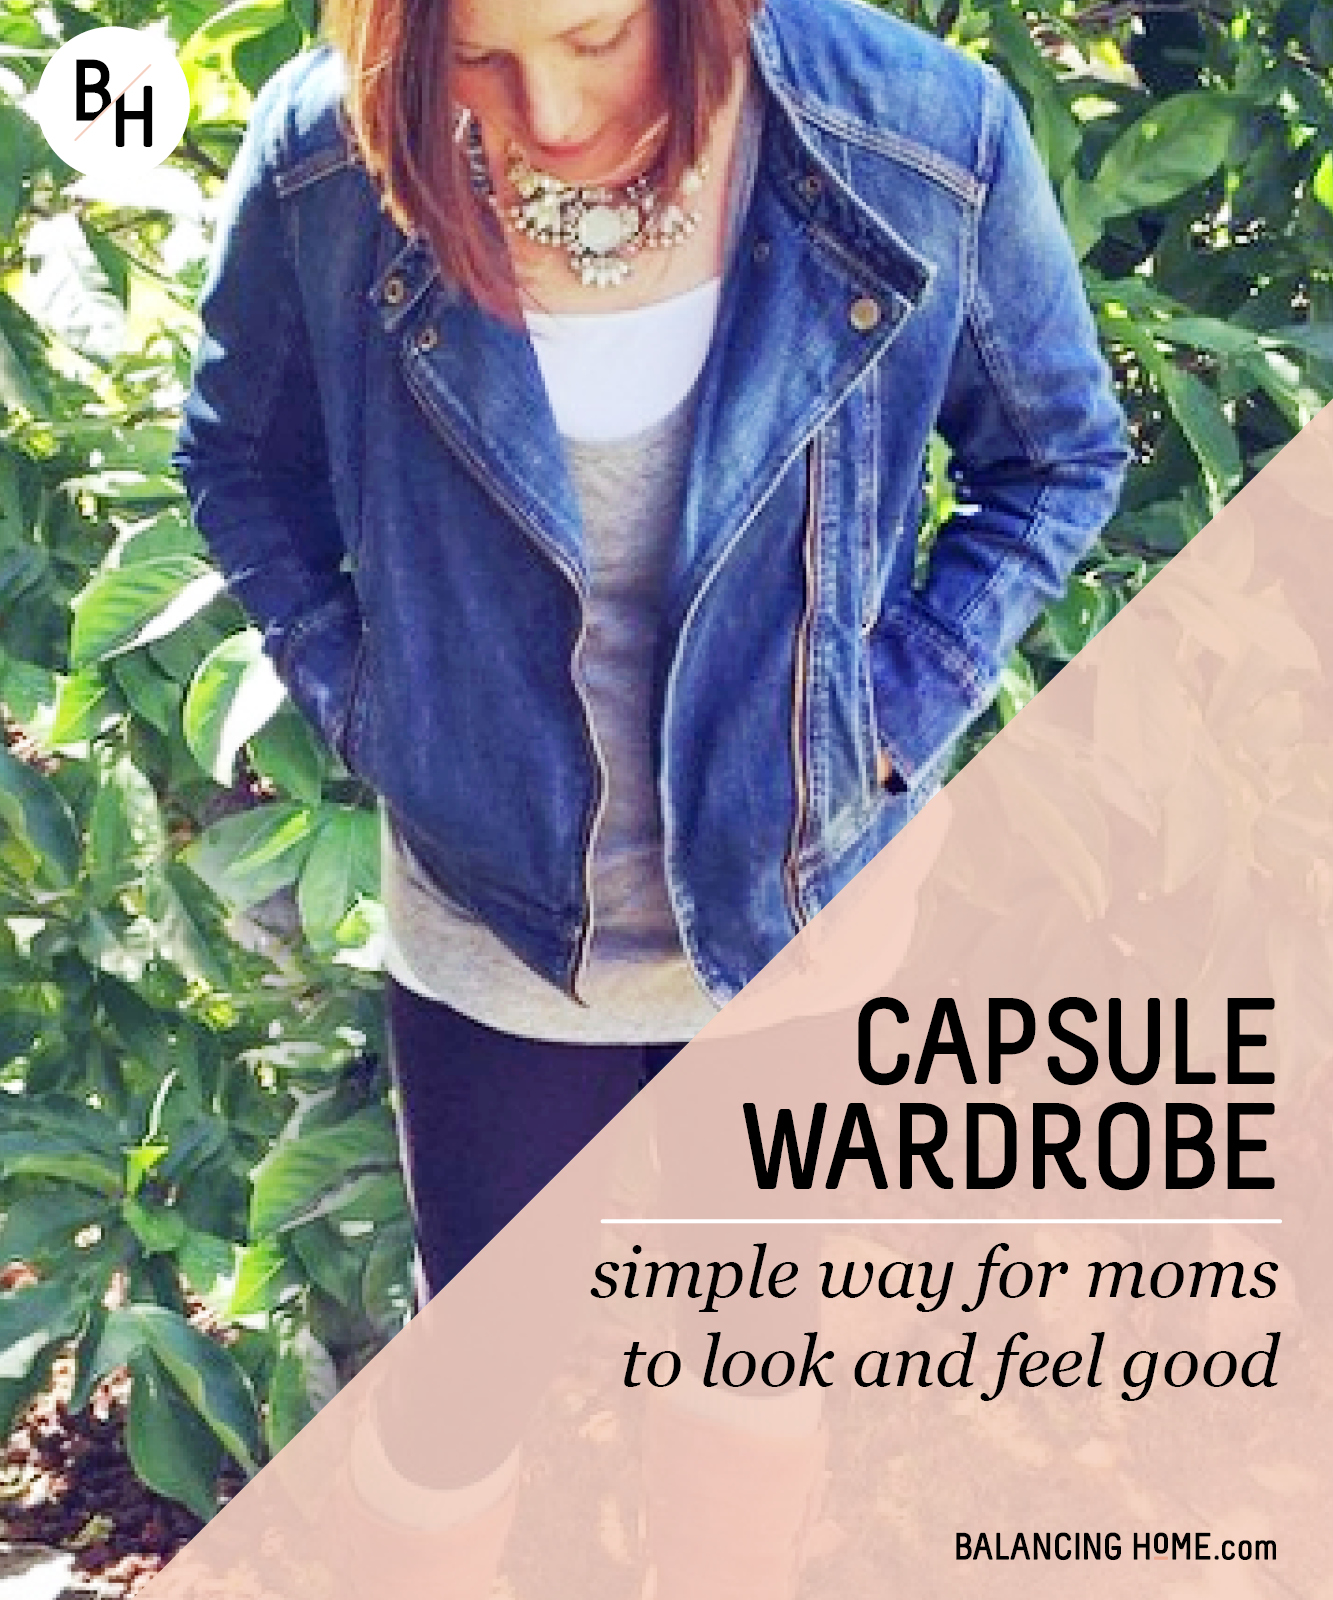 simple capsule wardrobe for moms: simple way for moms to look good and feel good